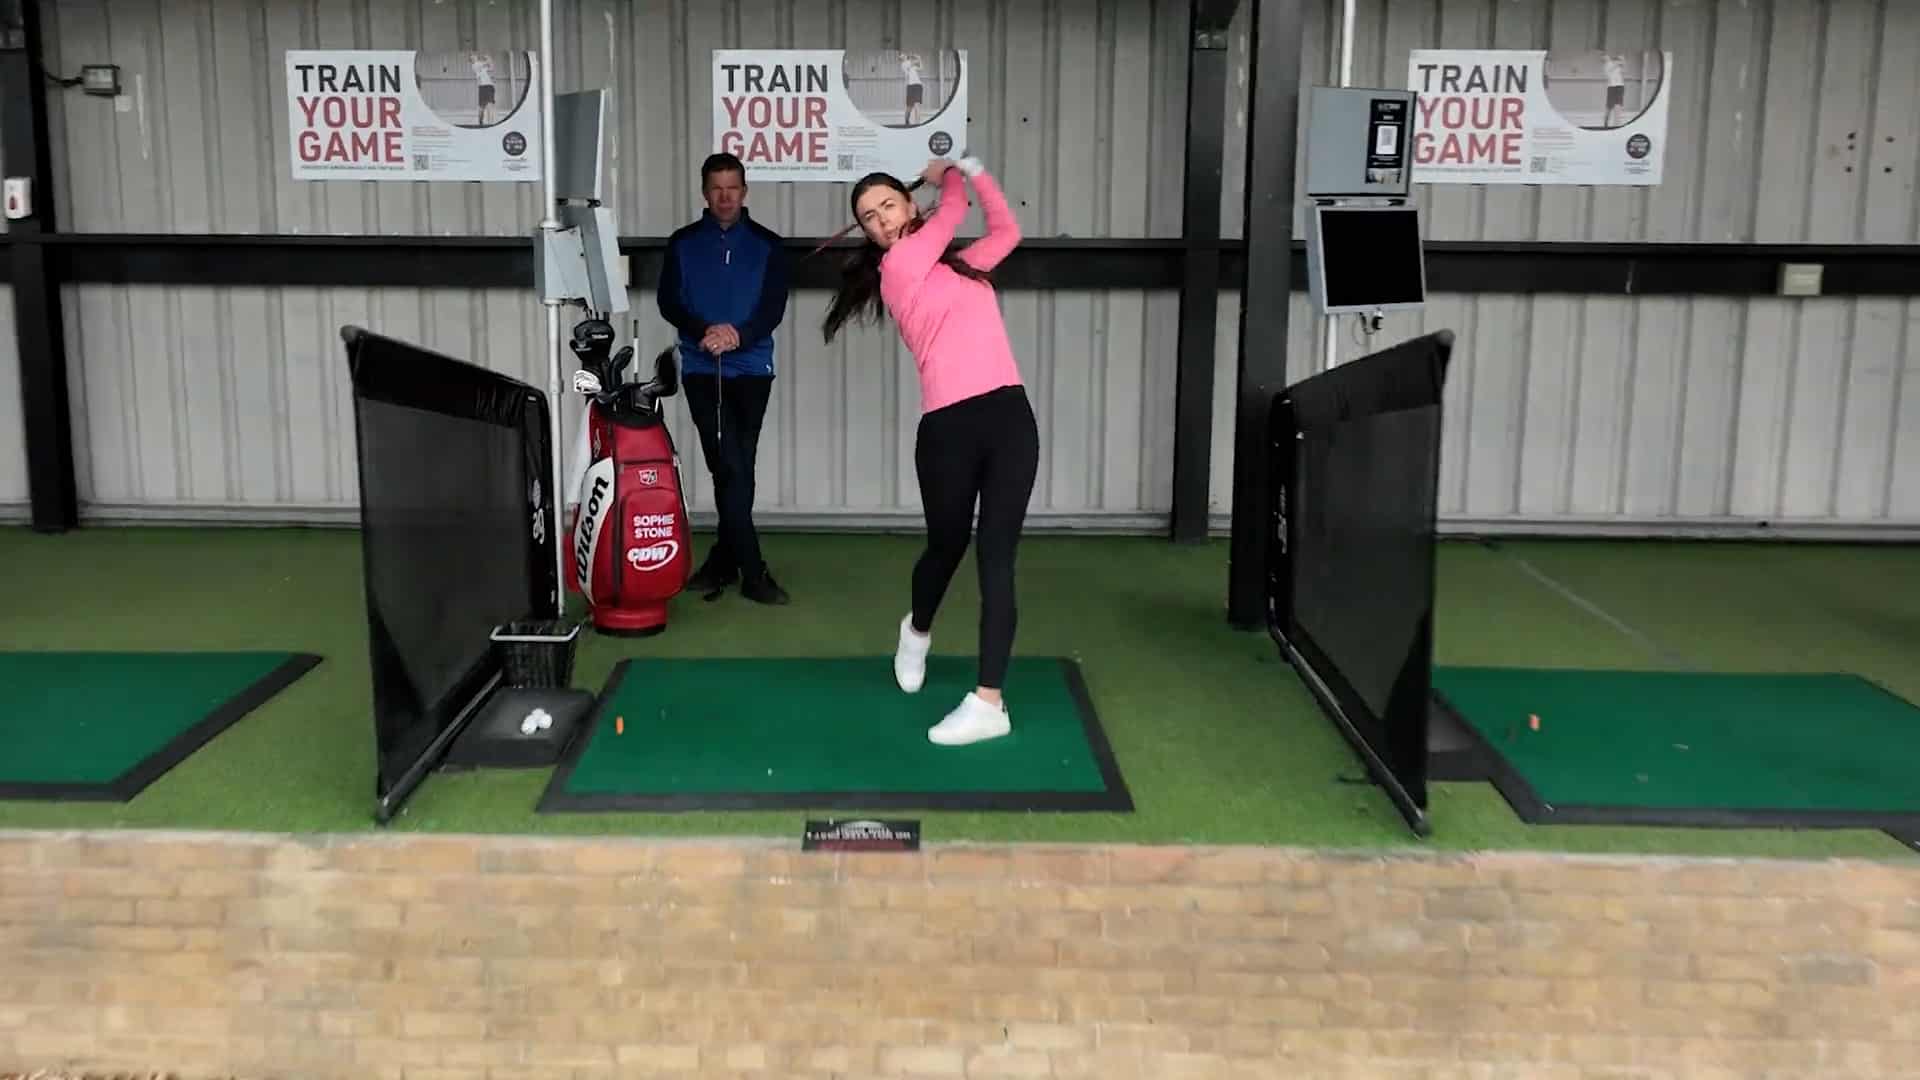 Train your game-golf